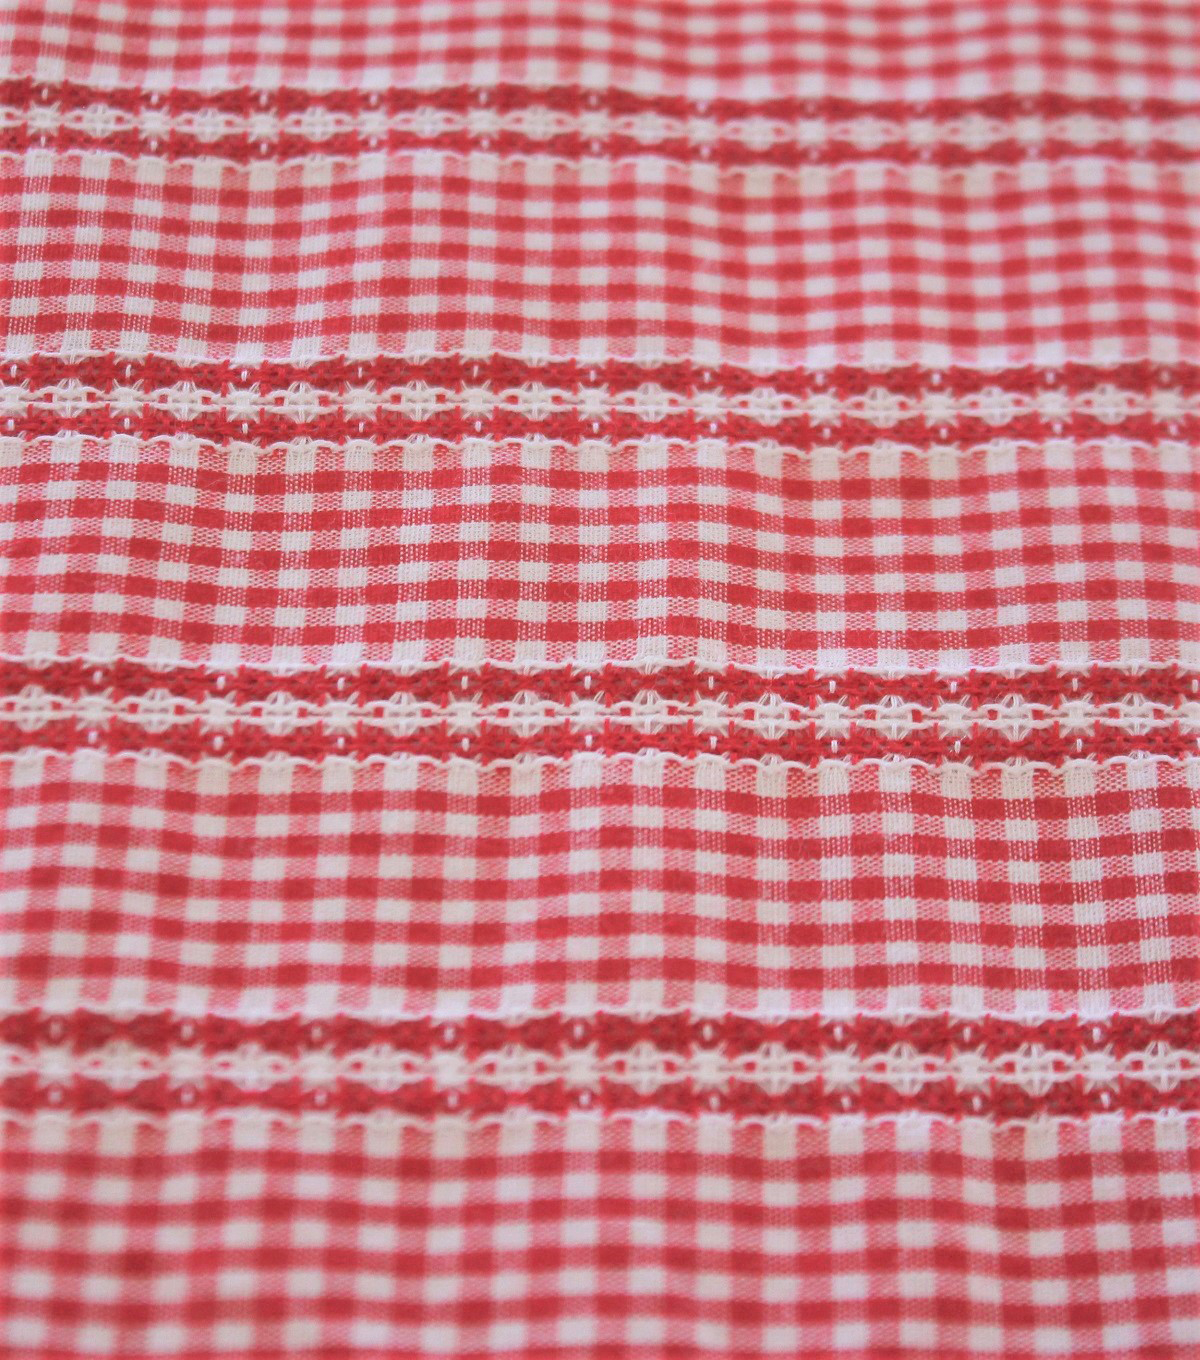 Gingham Embroidery Patterns Free Specialty Cotton Micro Gingham With Stripe Cotton Fabric Red White